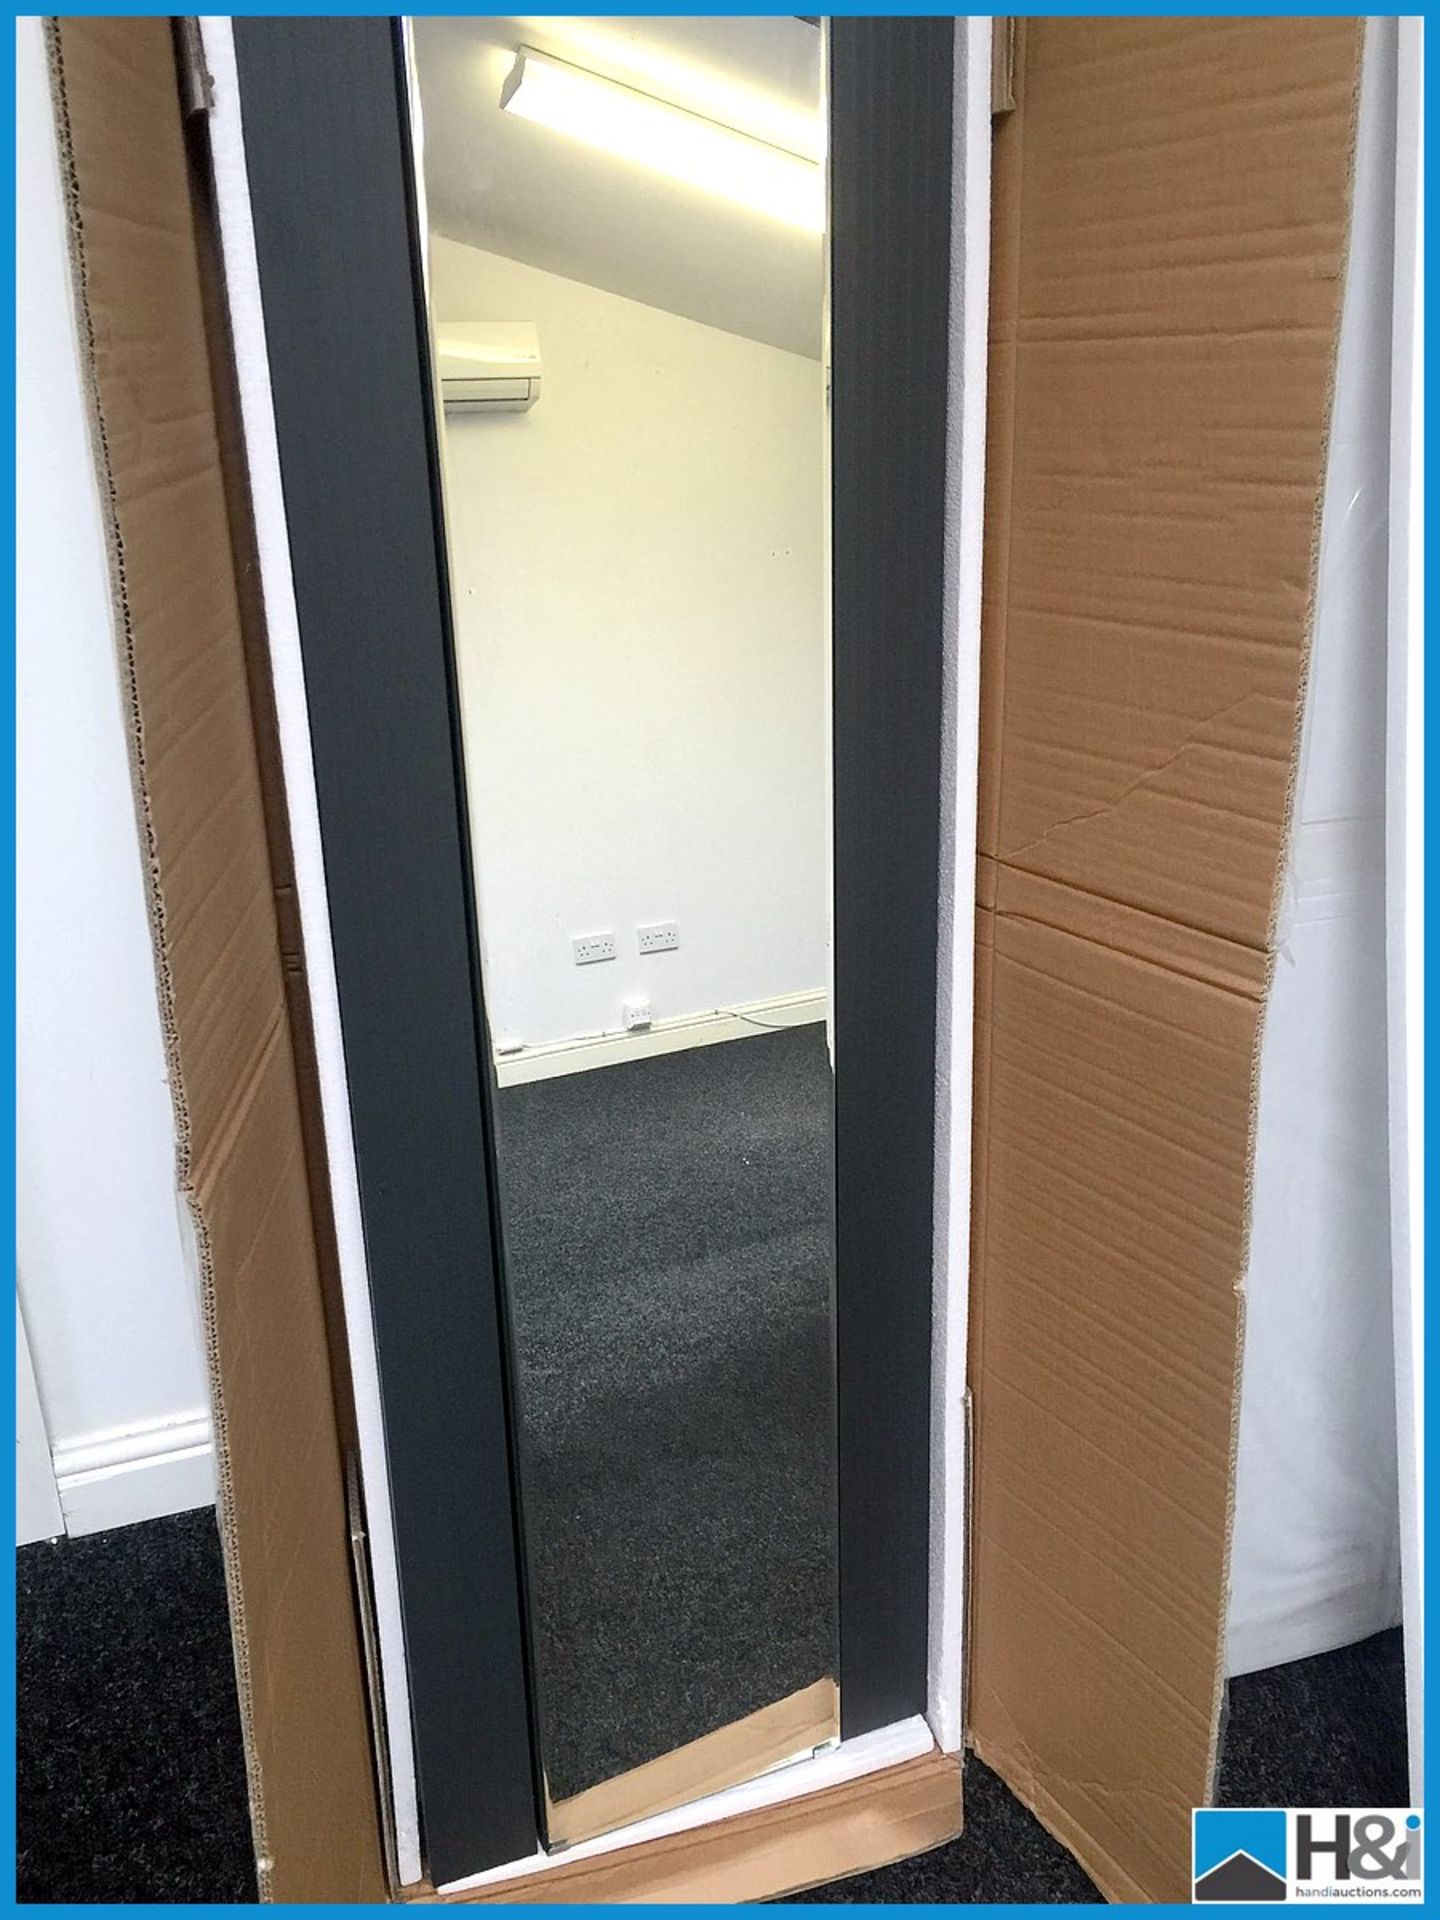 Stunning Phoenix Anthracite Image designer radiator with central mirror new in box 470mm x 1700mm - Image 2 of 4